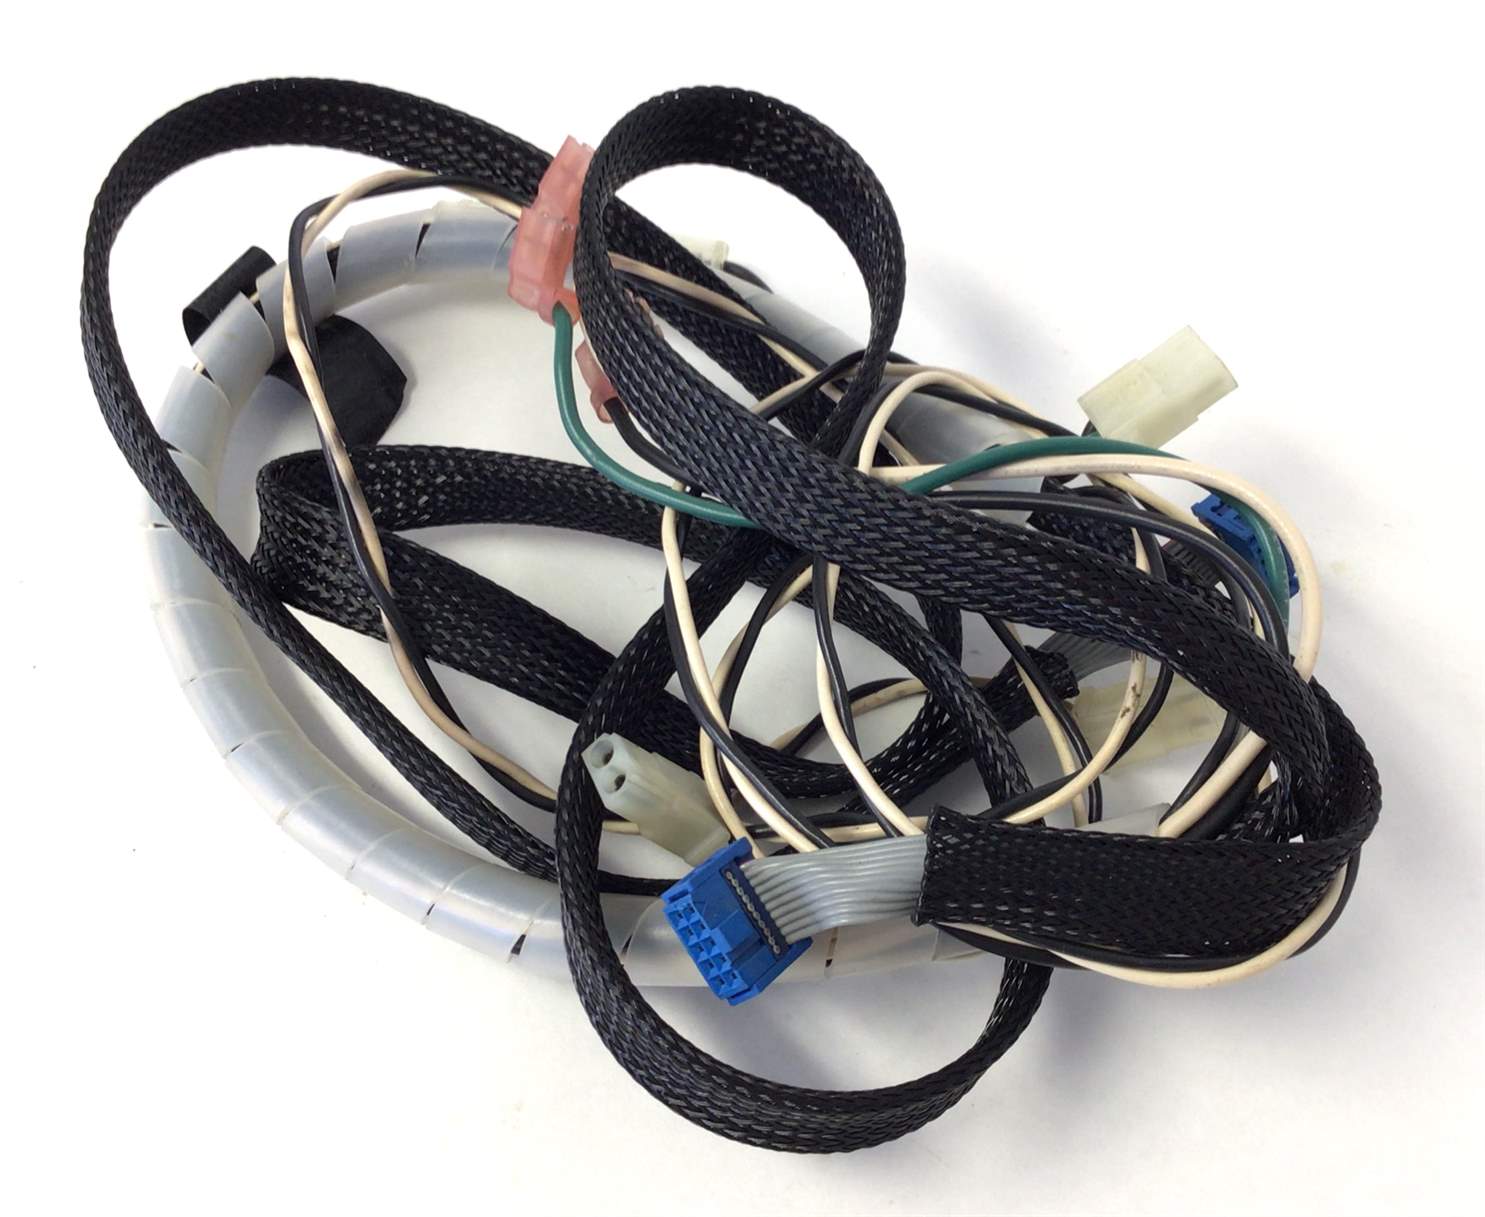 Wire Harness Set With Ribbon Cable (Used)